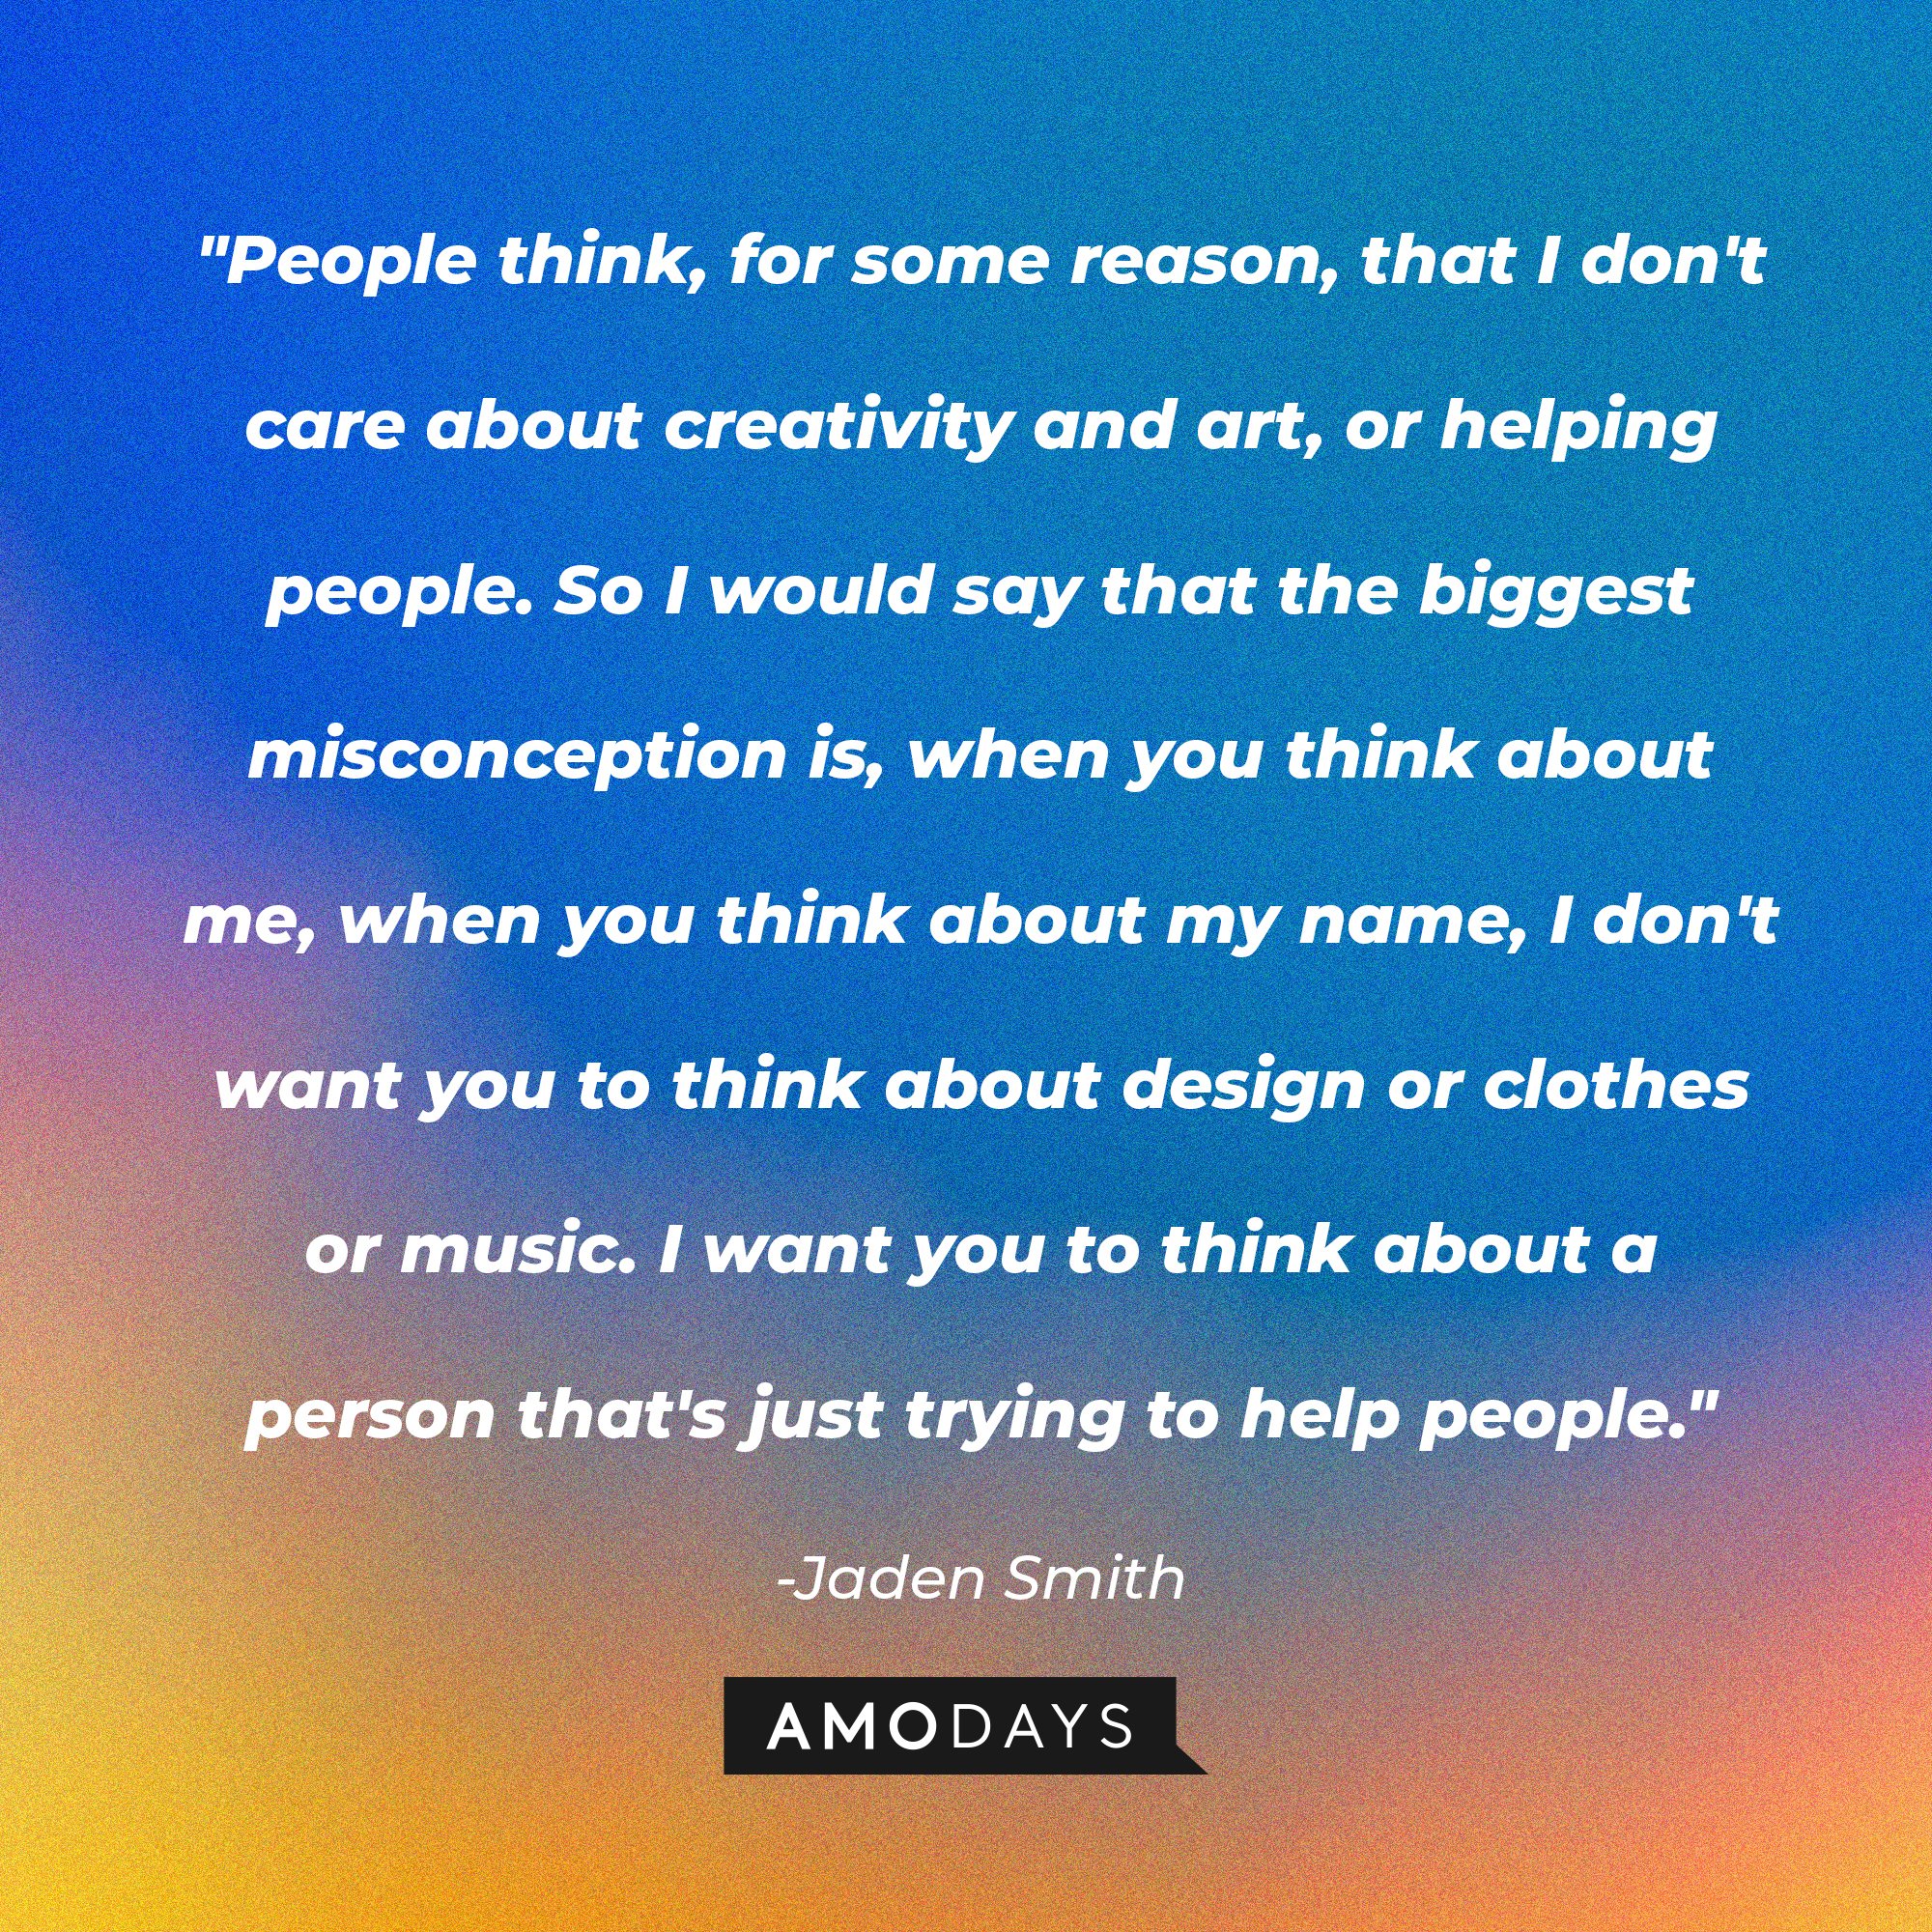 Jaden Smith's quote: "People think, for some reason, that I don't care about creativity and art, or helping people. So I would say that the biggest misconception is, when you think about me, when you think about my name, I don't want you to think about design or clothes or music. I want you to think about a person that's just trying to help people." | Image: AmoDays